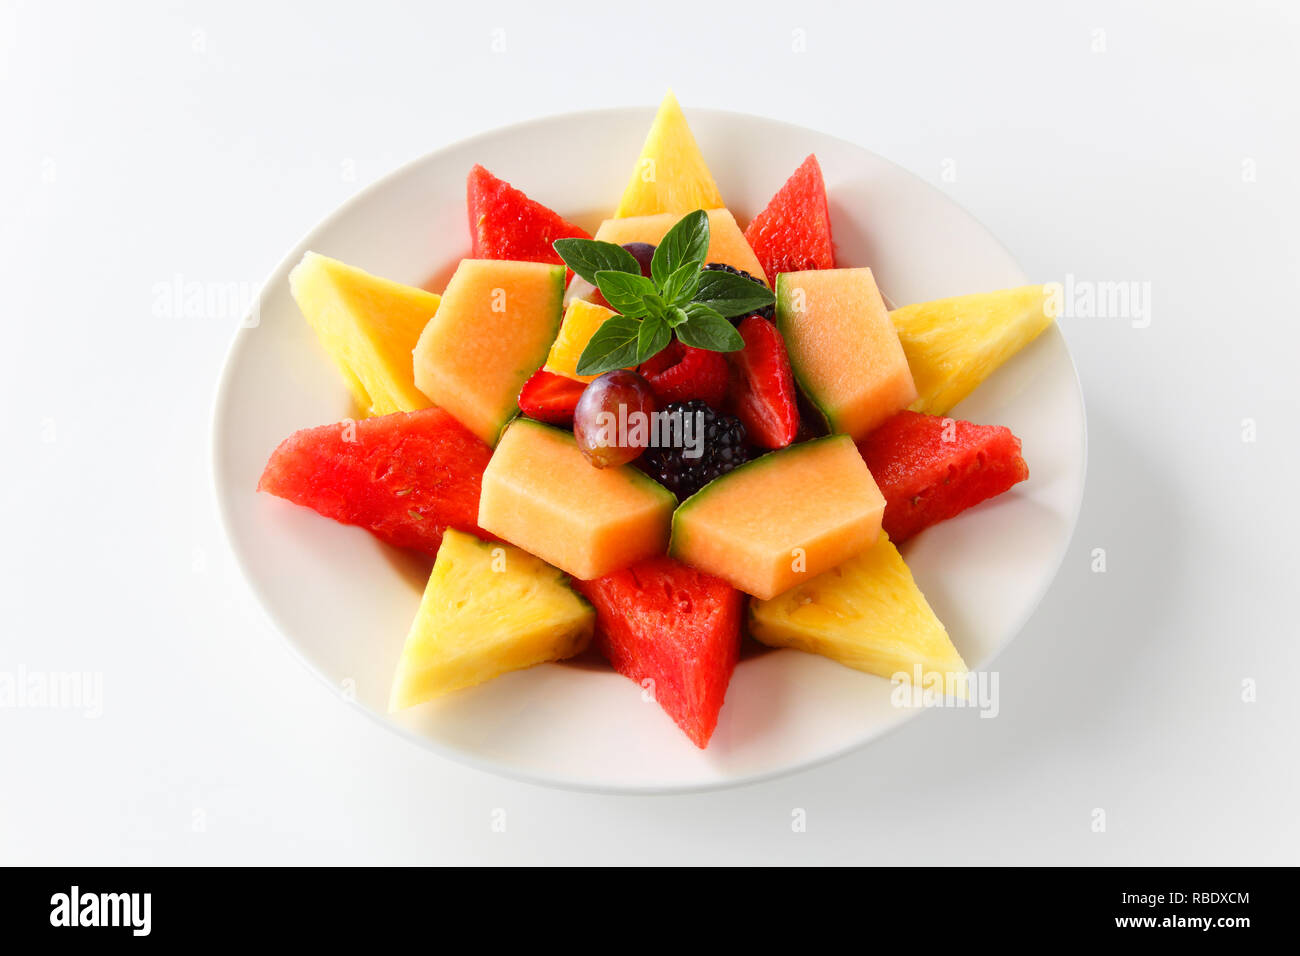 A plate of assorted tropical fruit shaped into a star including watermelon, pineapple, cantaloupe, grapes, blackberries, strawberries, raspberries, an Stock Photo